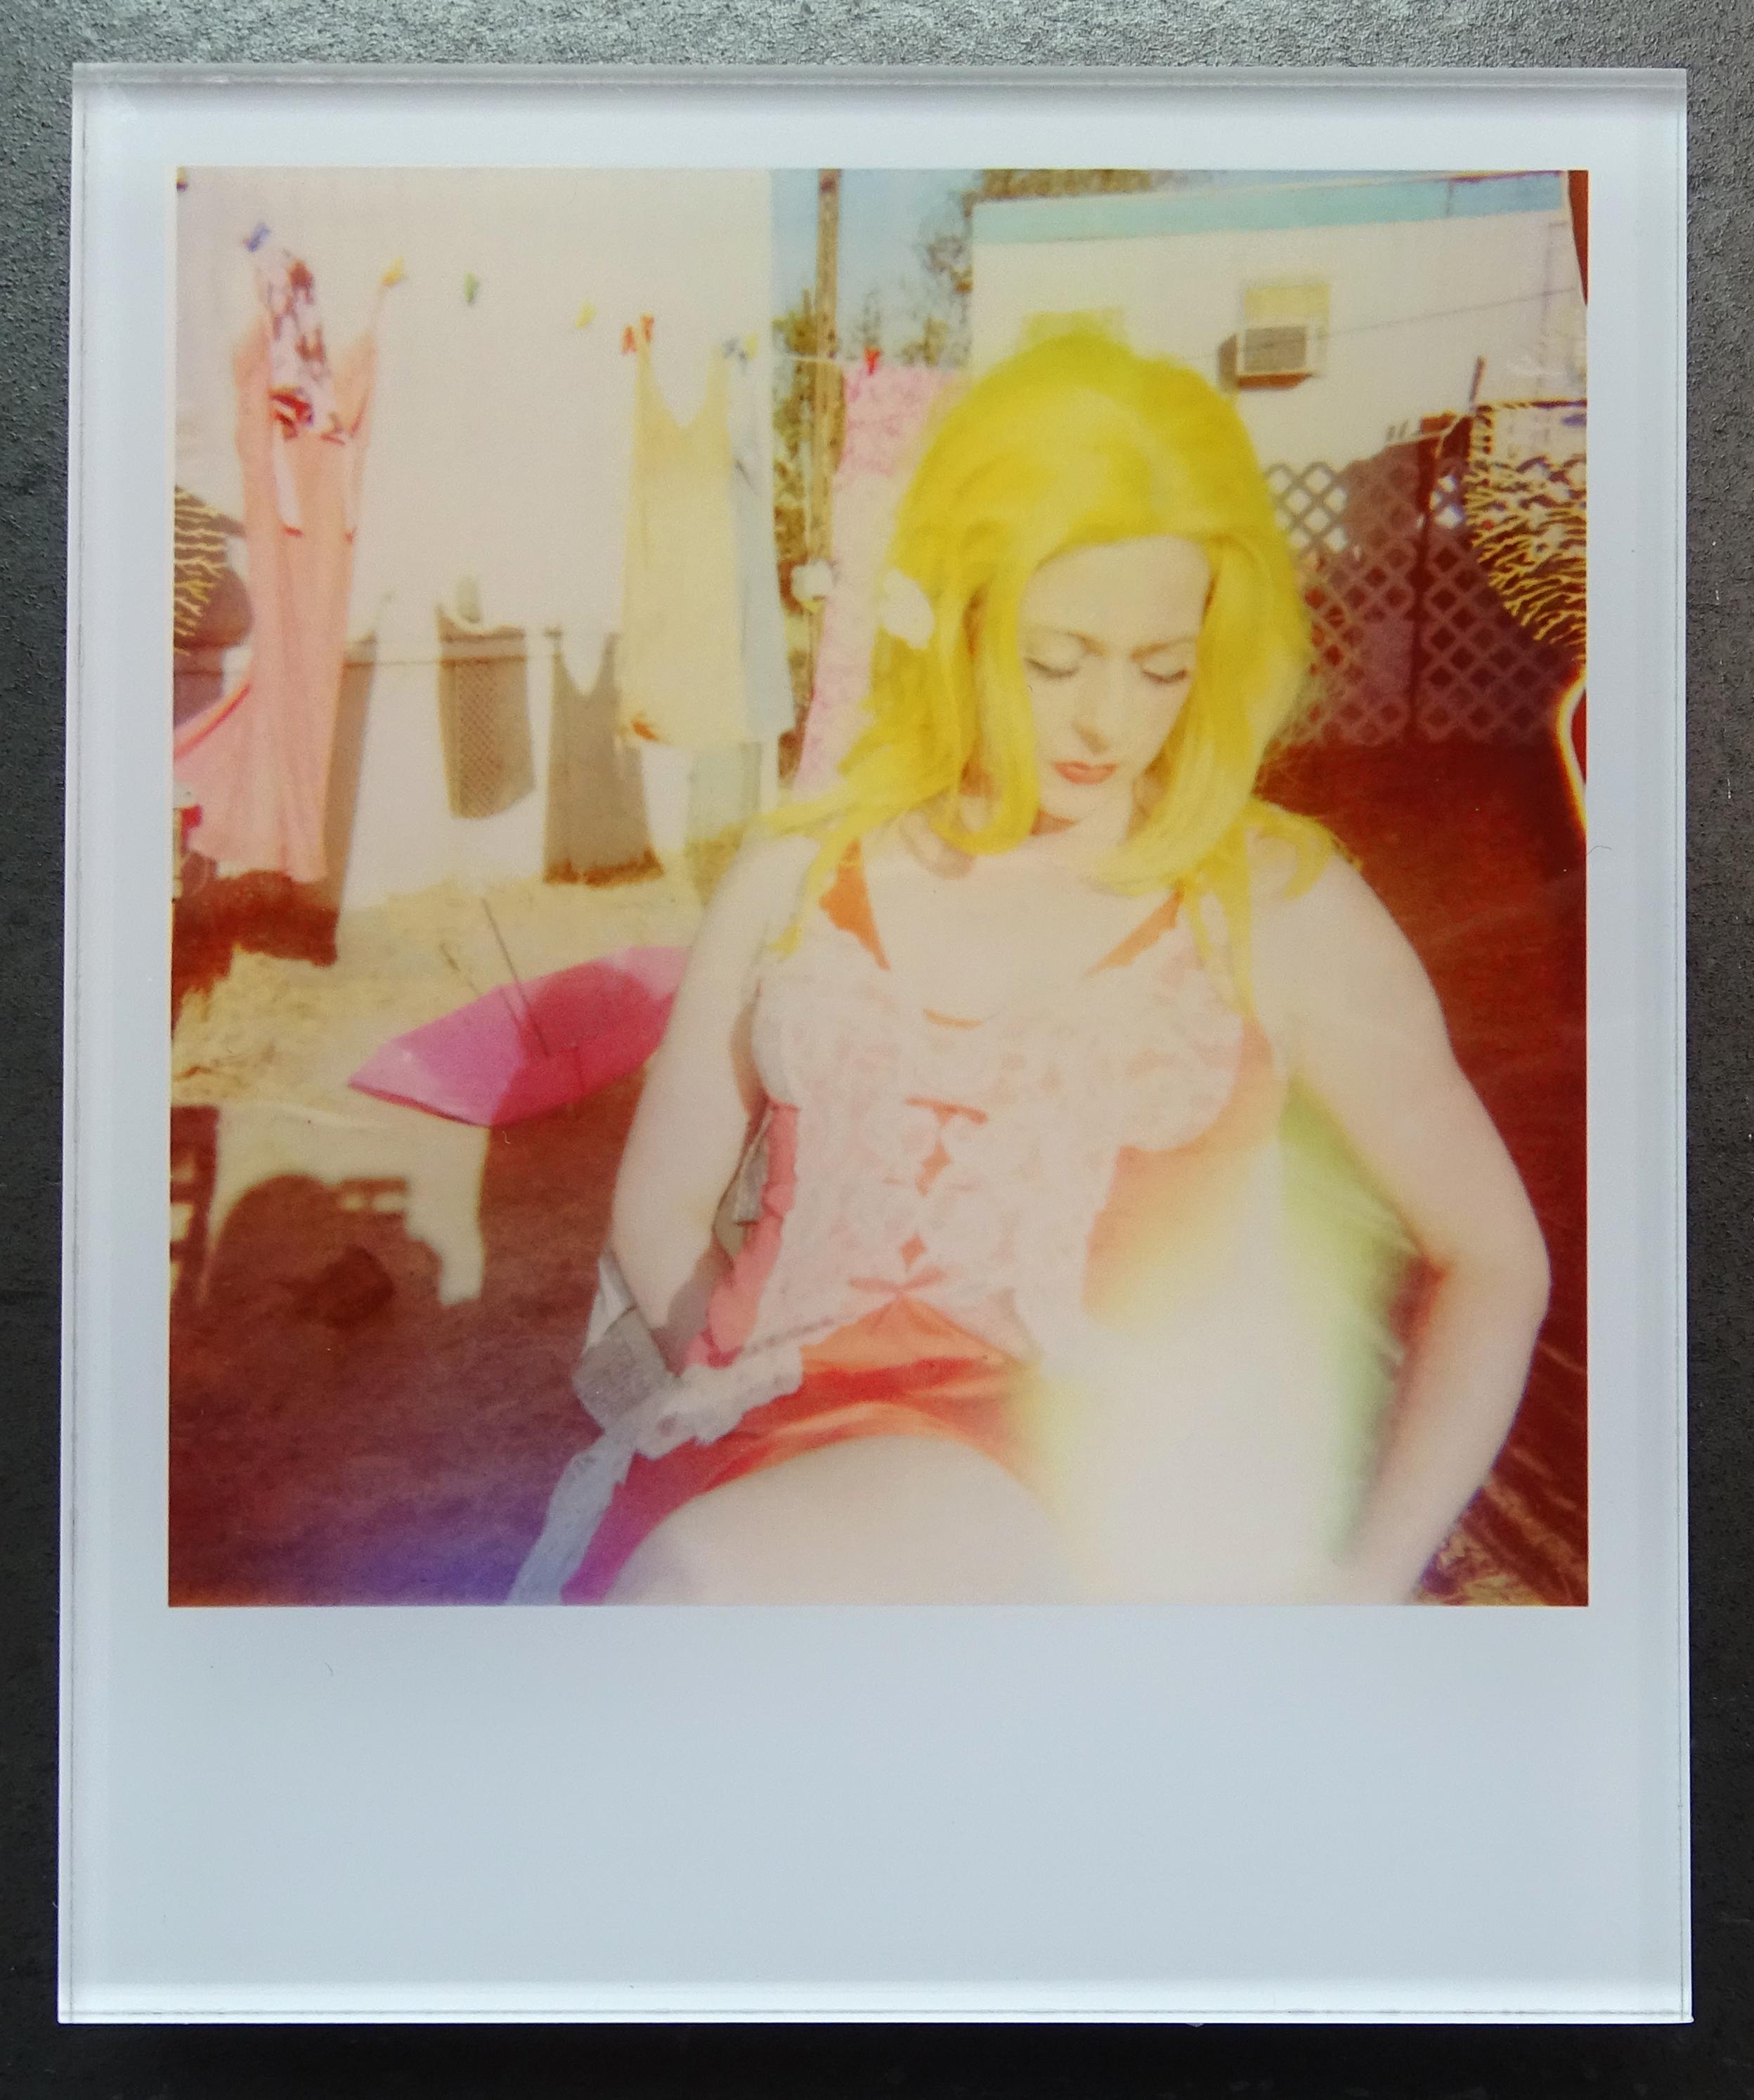 Stefanie Schneider's Minis
Available (Oxana's 30th Birthday), 2008

Signed and signature brand on verso.
Lambda digital Color Photographs based on a Polaroid.
Sandwiched in between Plexiglass (thickness 0.7cm)

Polaroid sized open Editions